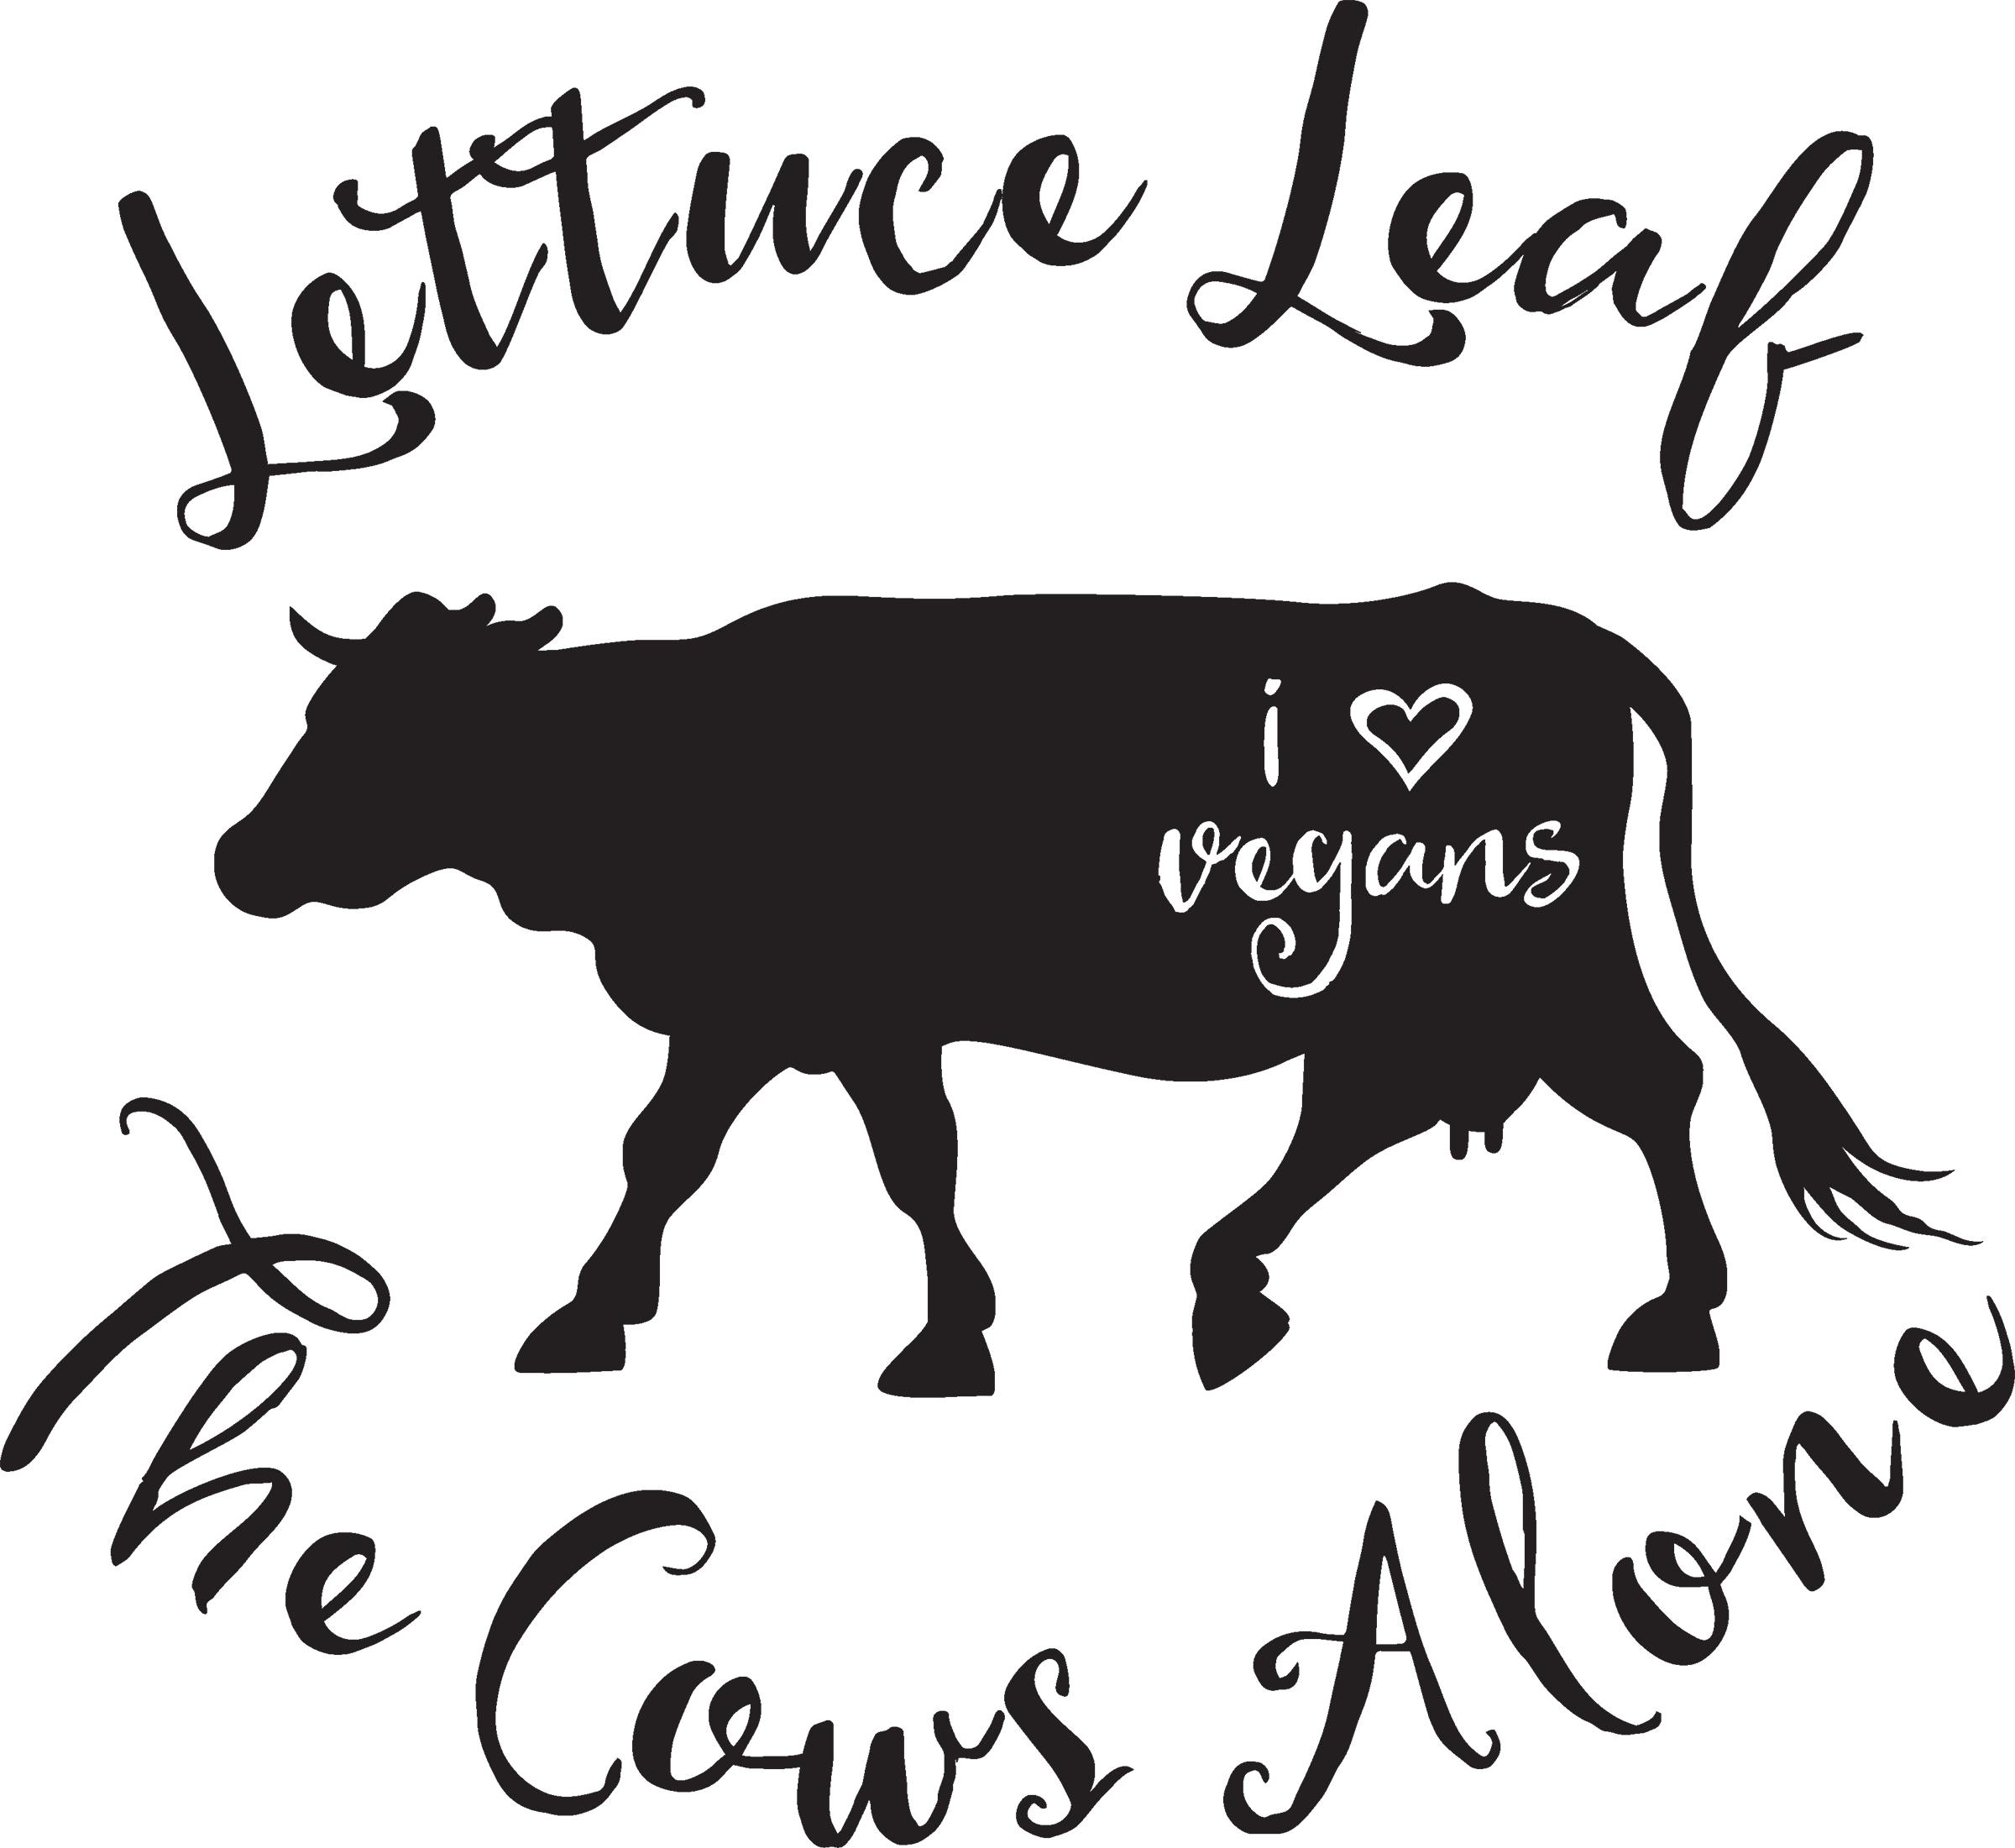 Ladies Classic Fit V-Neck - Lettuce Leaf The Cows Alone